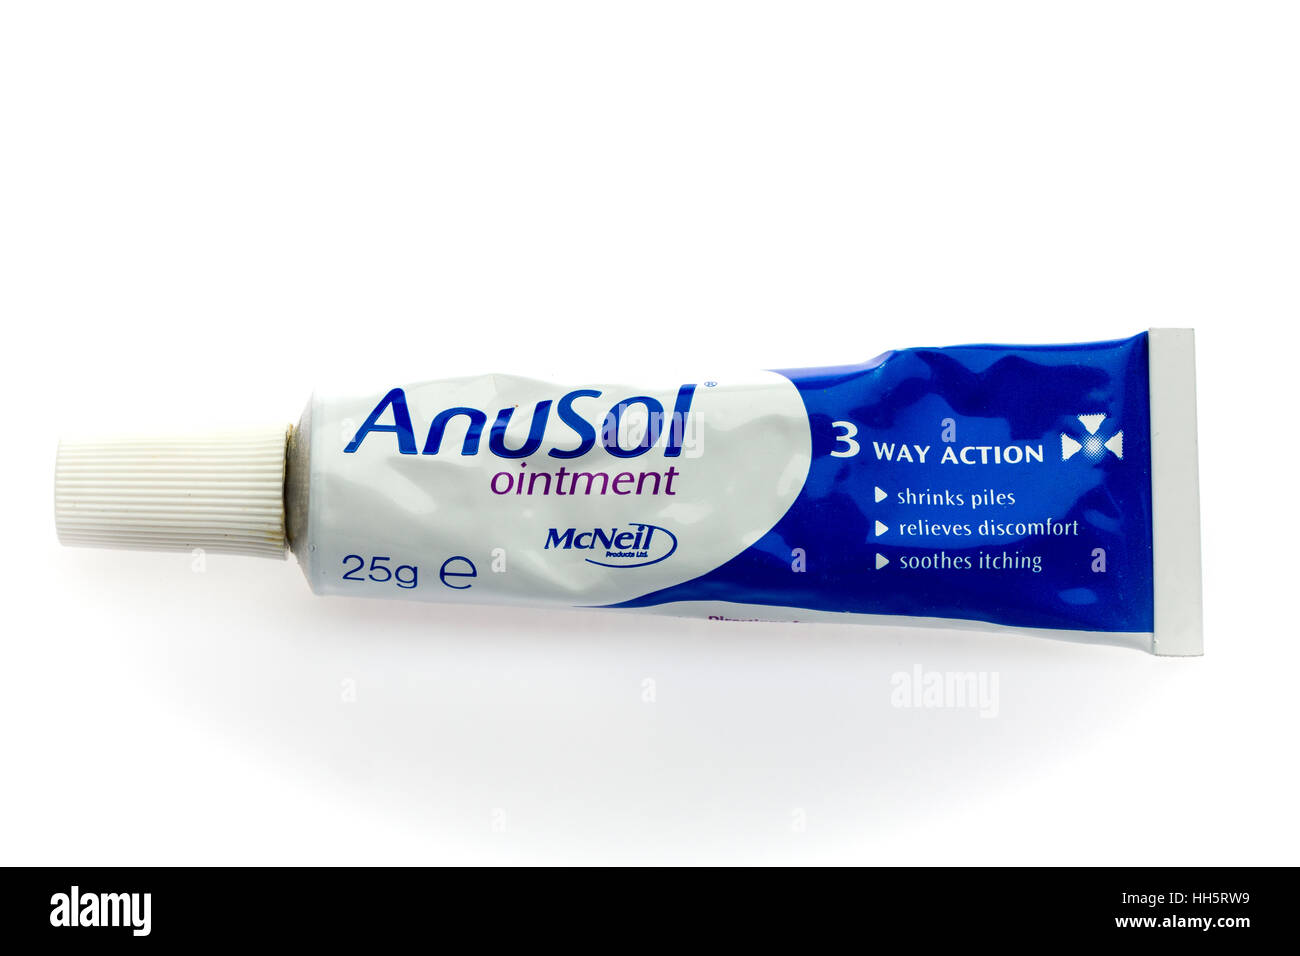 Anusol ointment for the treatment of piles Stock Photo